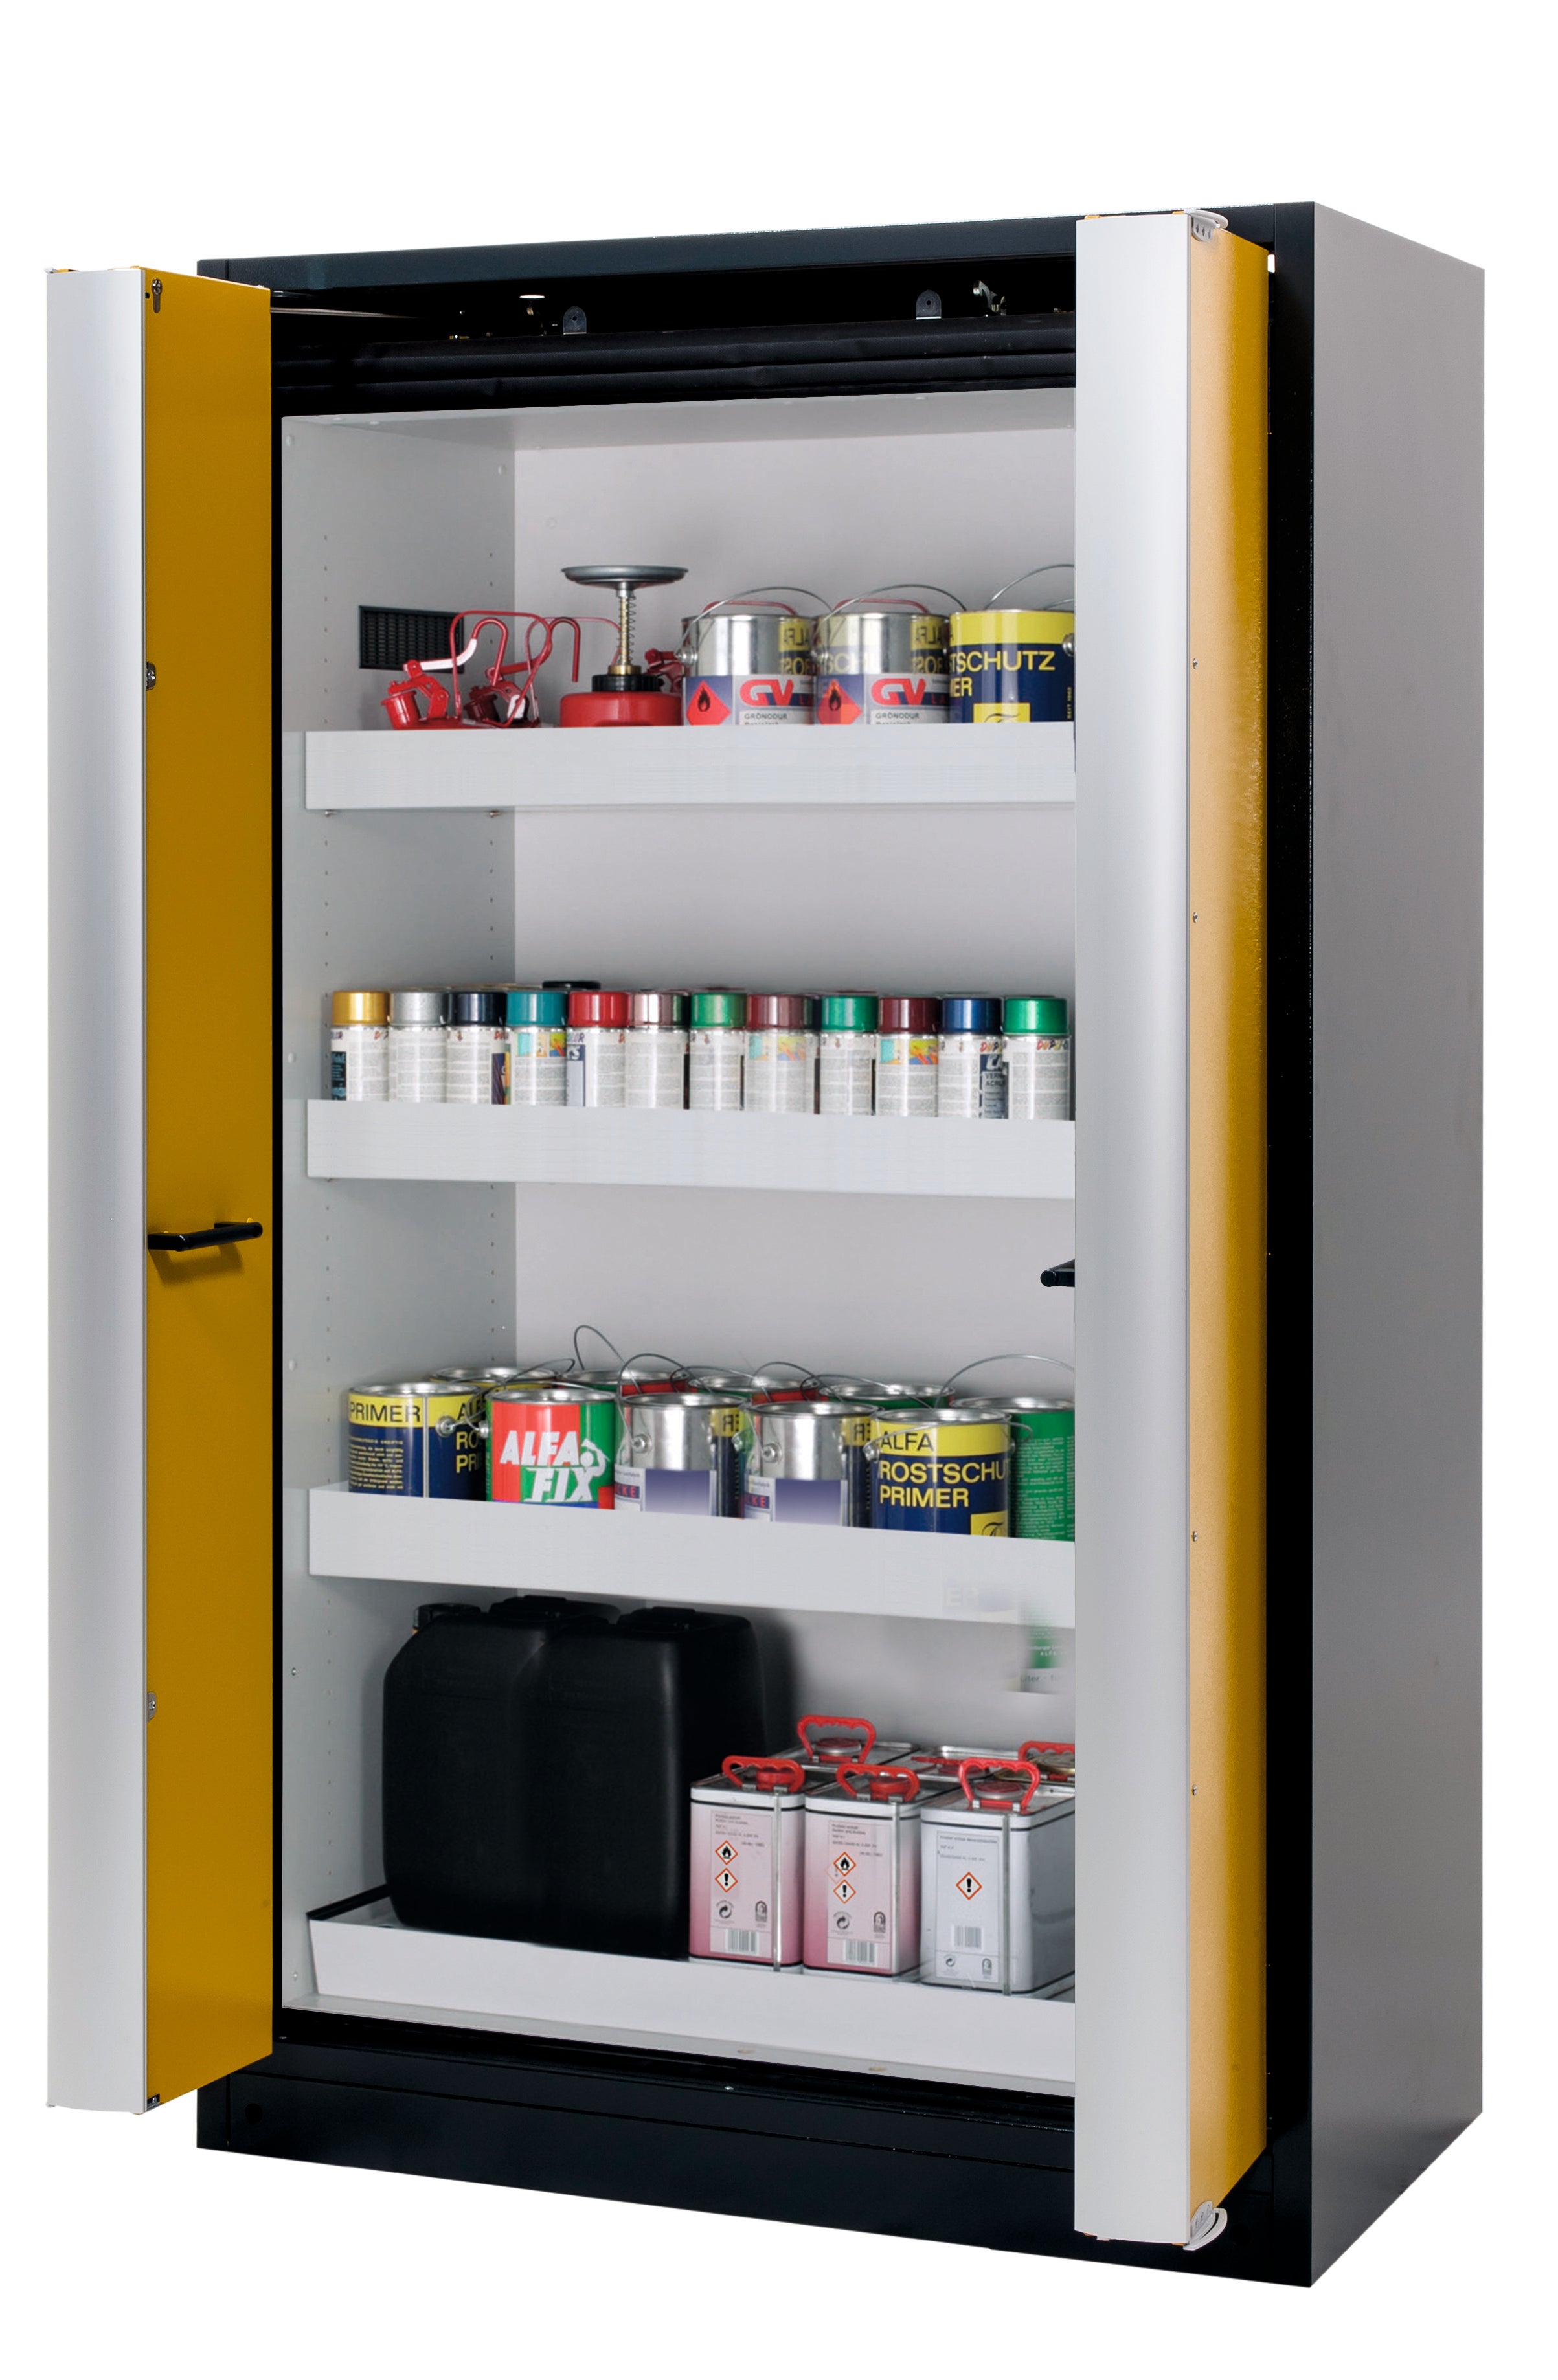 Type 90 safety cabinet Q-PHOENIX-90 model Q90.195.120.FD in safety yellow RAL 1004 with 3x standard tray base (sheet steel)